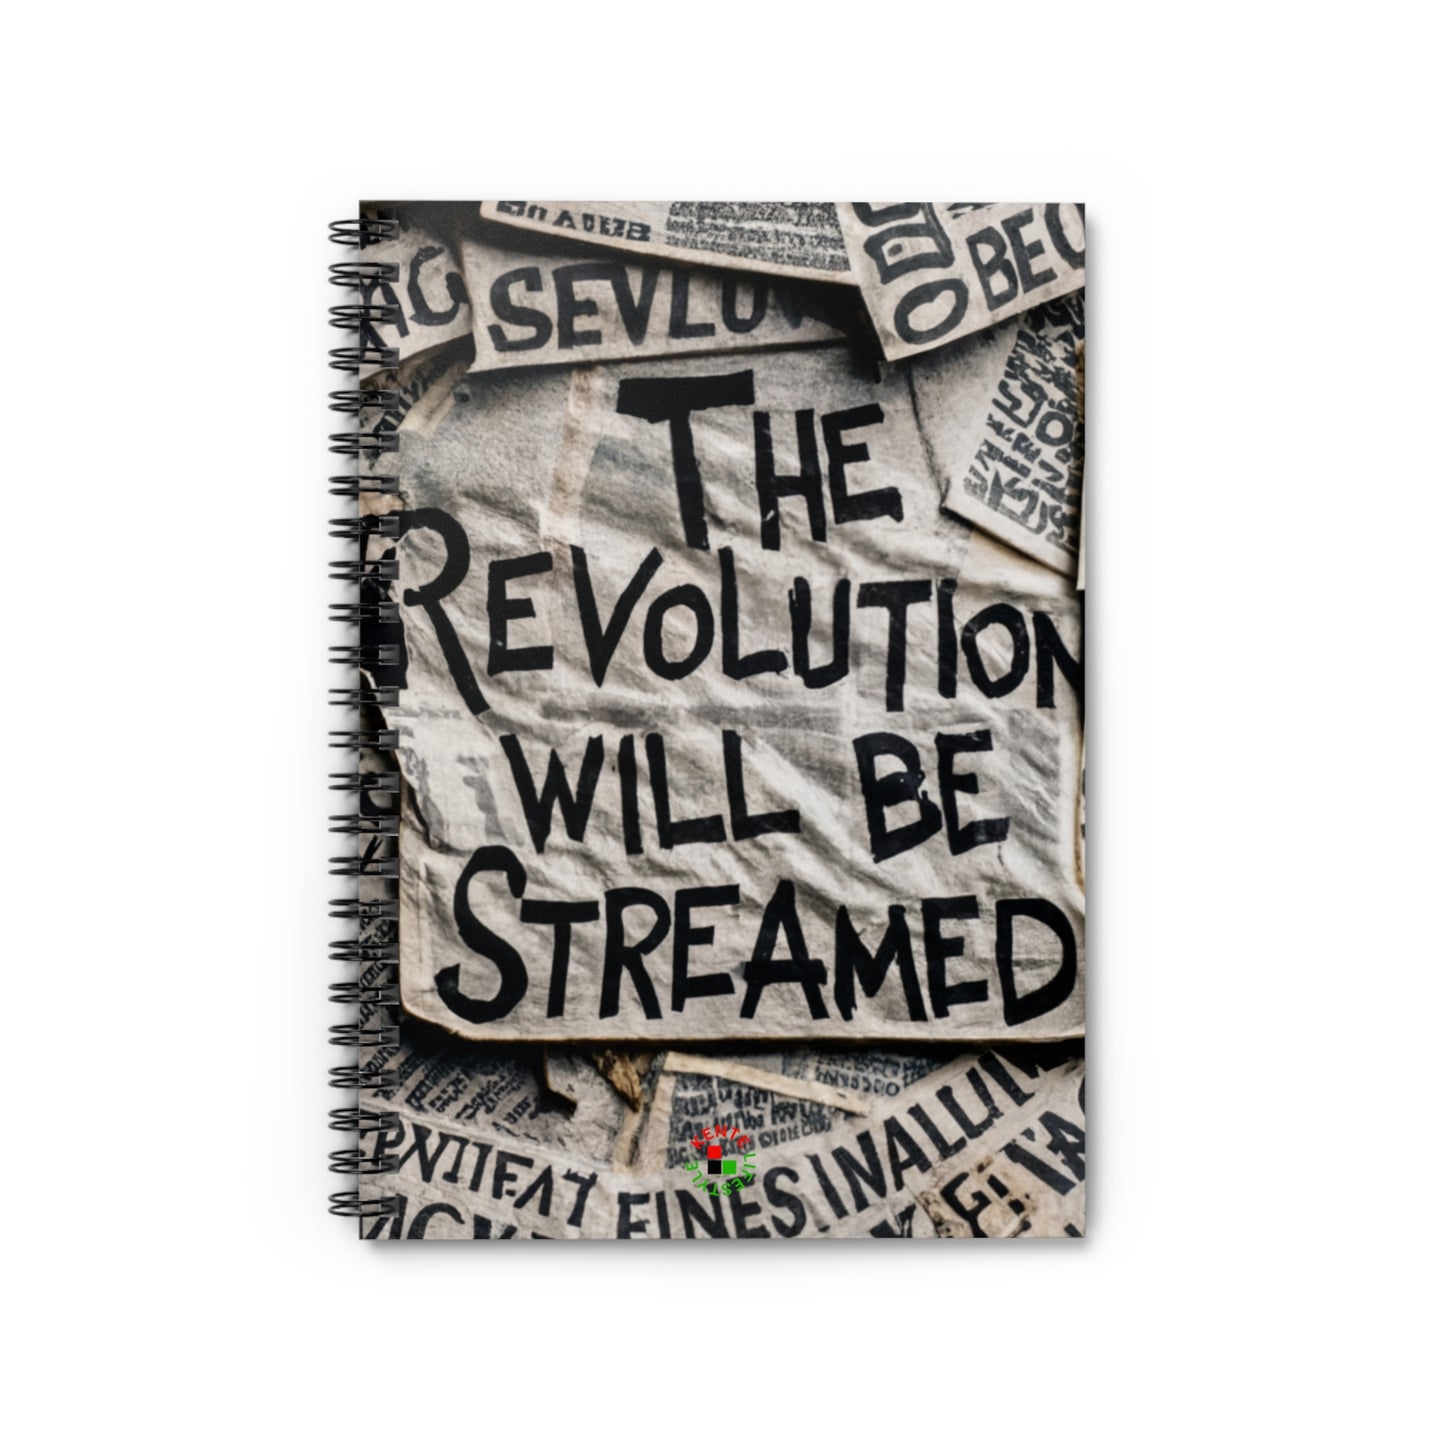 "The Revolution will be streamed" Spiral Notebook (Ruled Line)